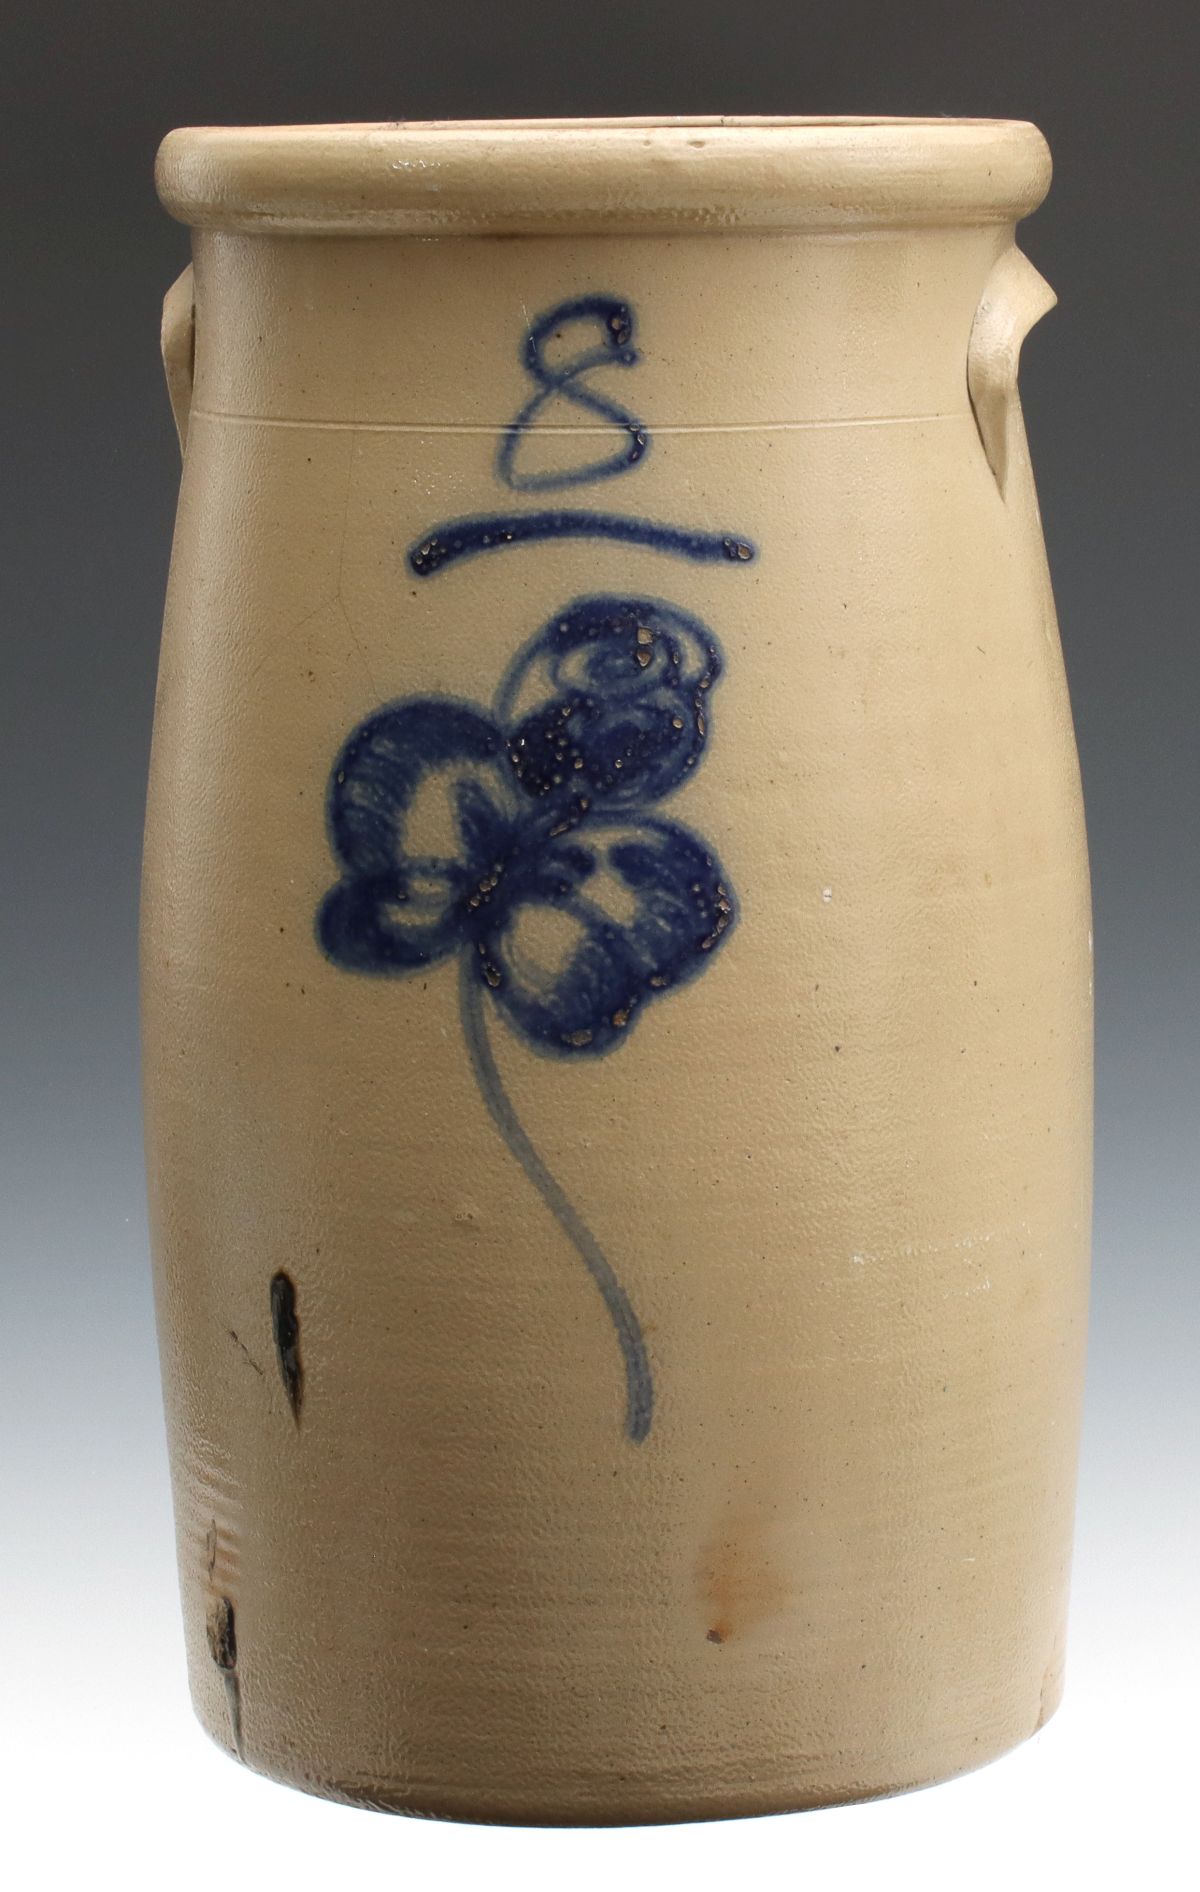 A BLUE DECORATED CHURN SIGNED RED WING STONEWARE COMPANY